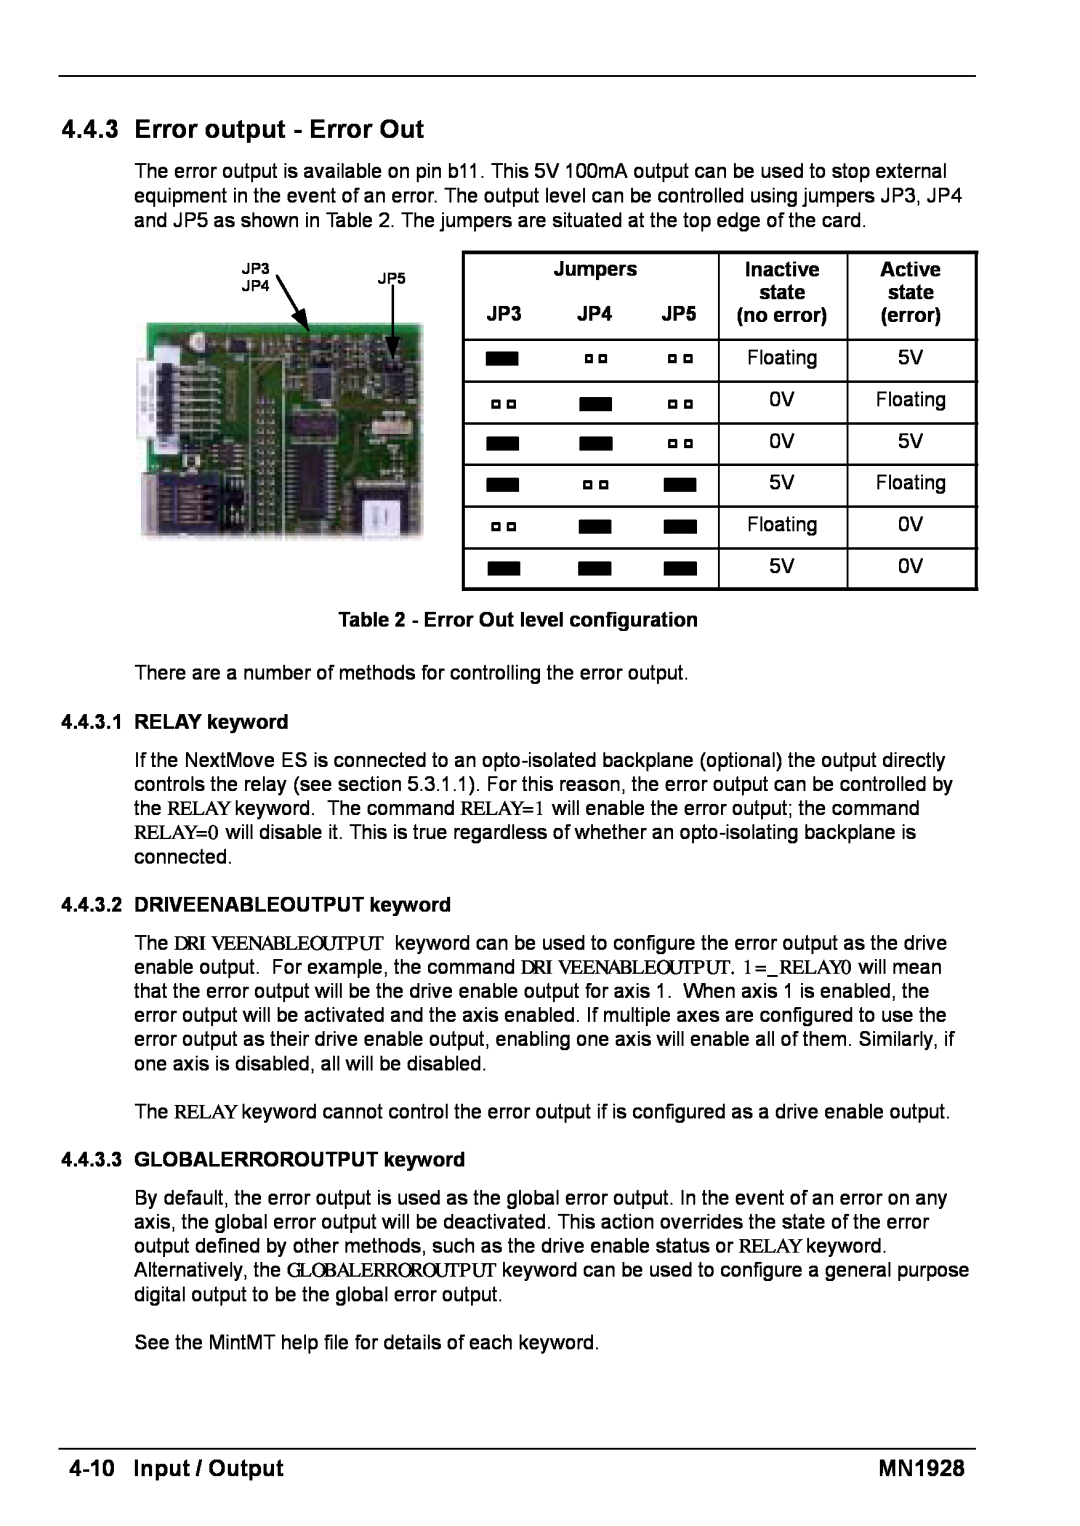 Baldor MN1928 4-10Input / Output, Jumpers, Inactive, Active, Error Out level configuration, 4.4.3.1RELAY keyword 